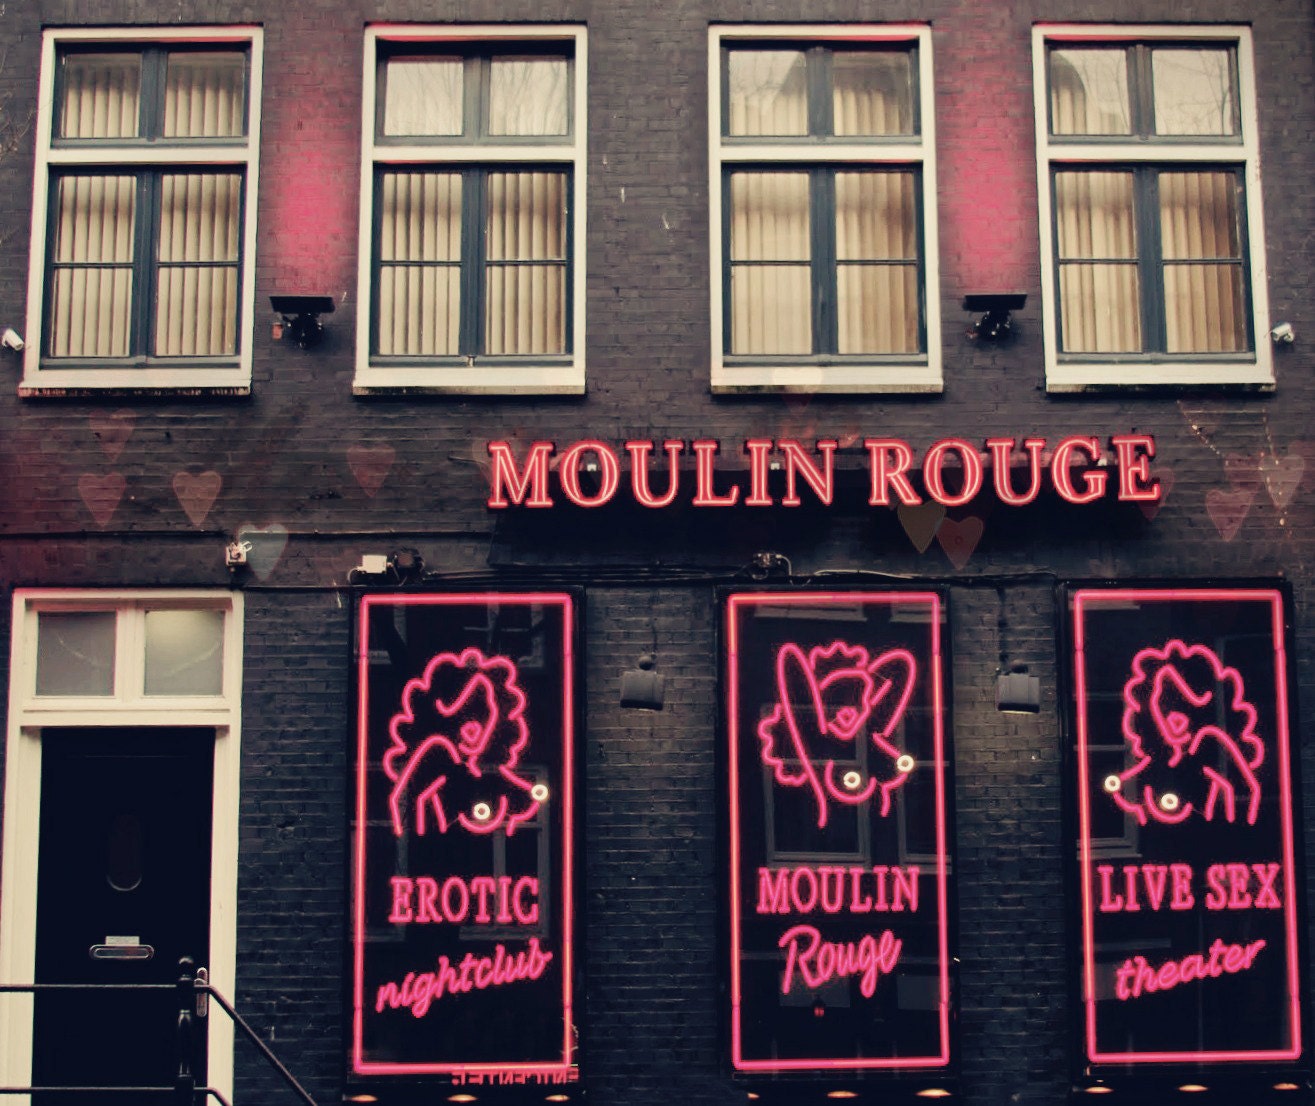 Mature Print - 8x10 Adult Photography - Moulin Rouge, Red Light District - Burlesque Amsterdam, Women, Nude - Hearts, Hot Pink, Sensual